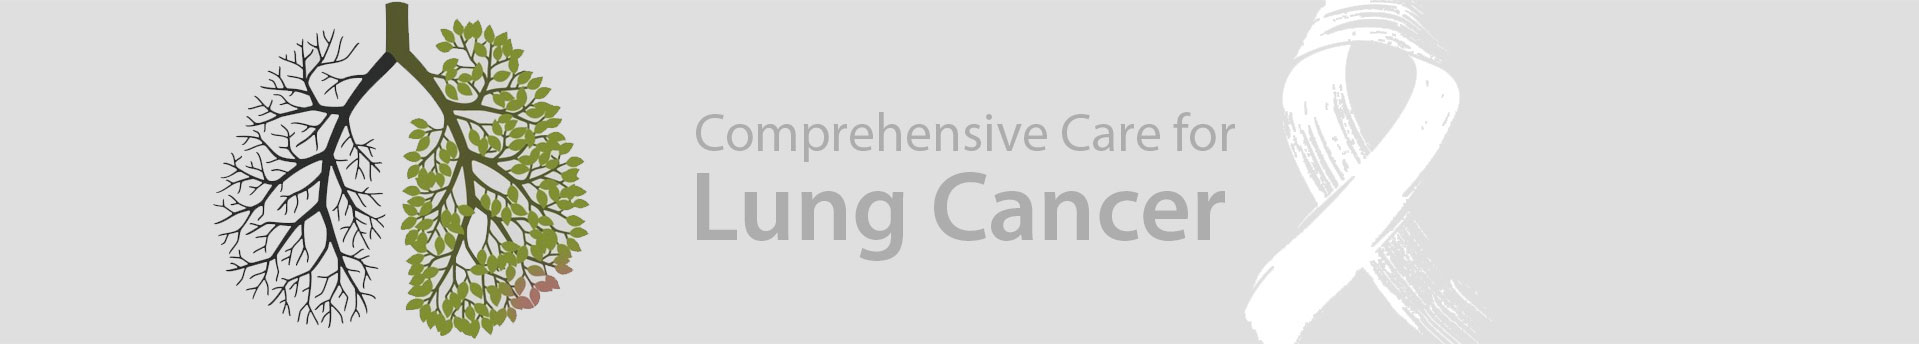 Medicaoncology Lung Cancer